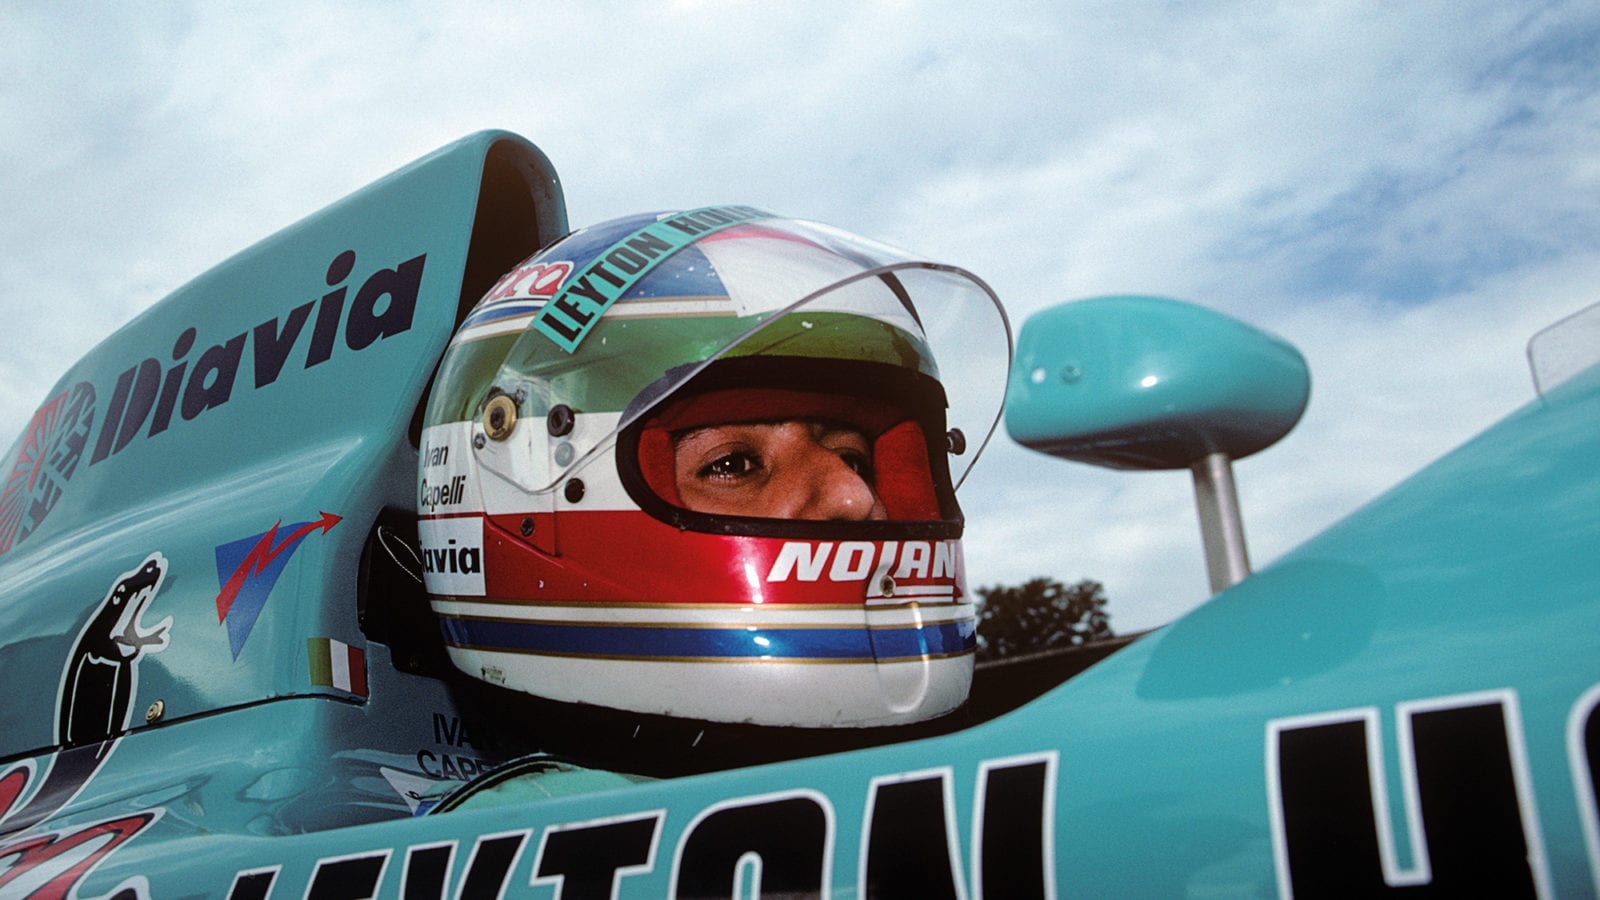 Ivan Capelli in his Leyton House March at the 1988 Belgian Grand Prix